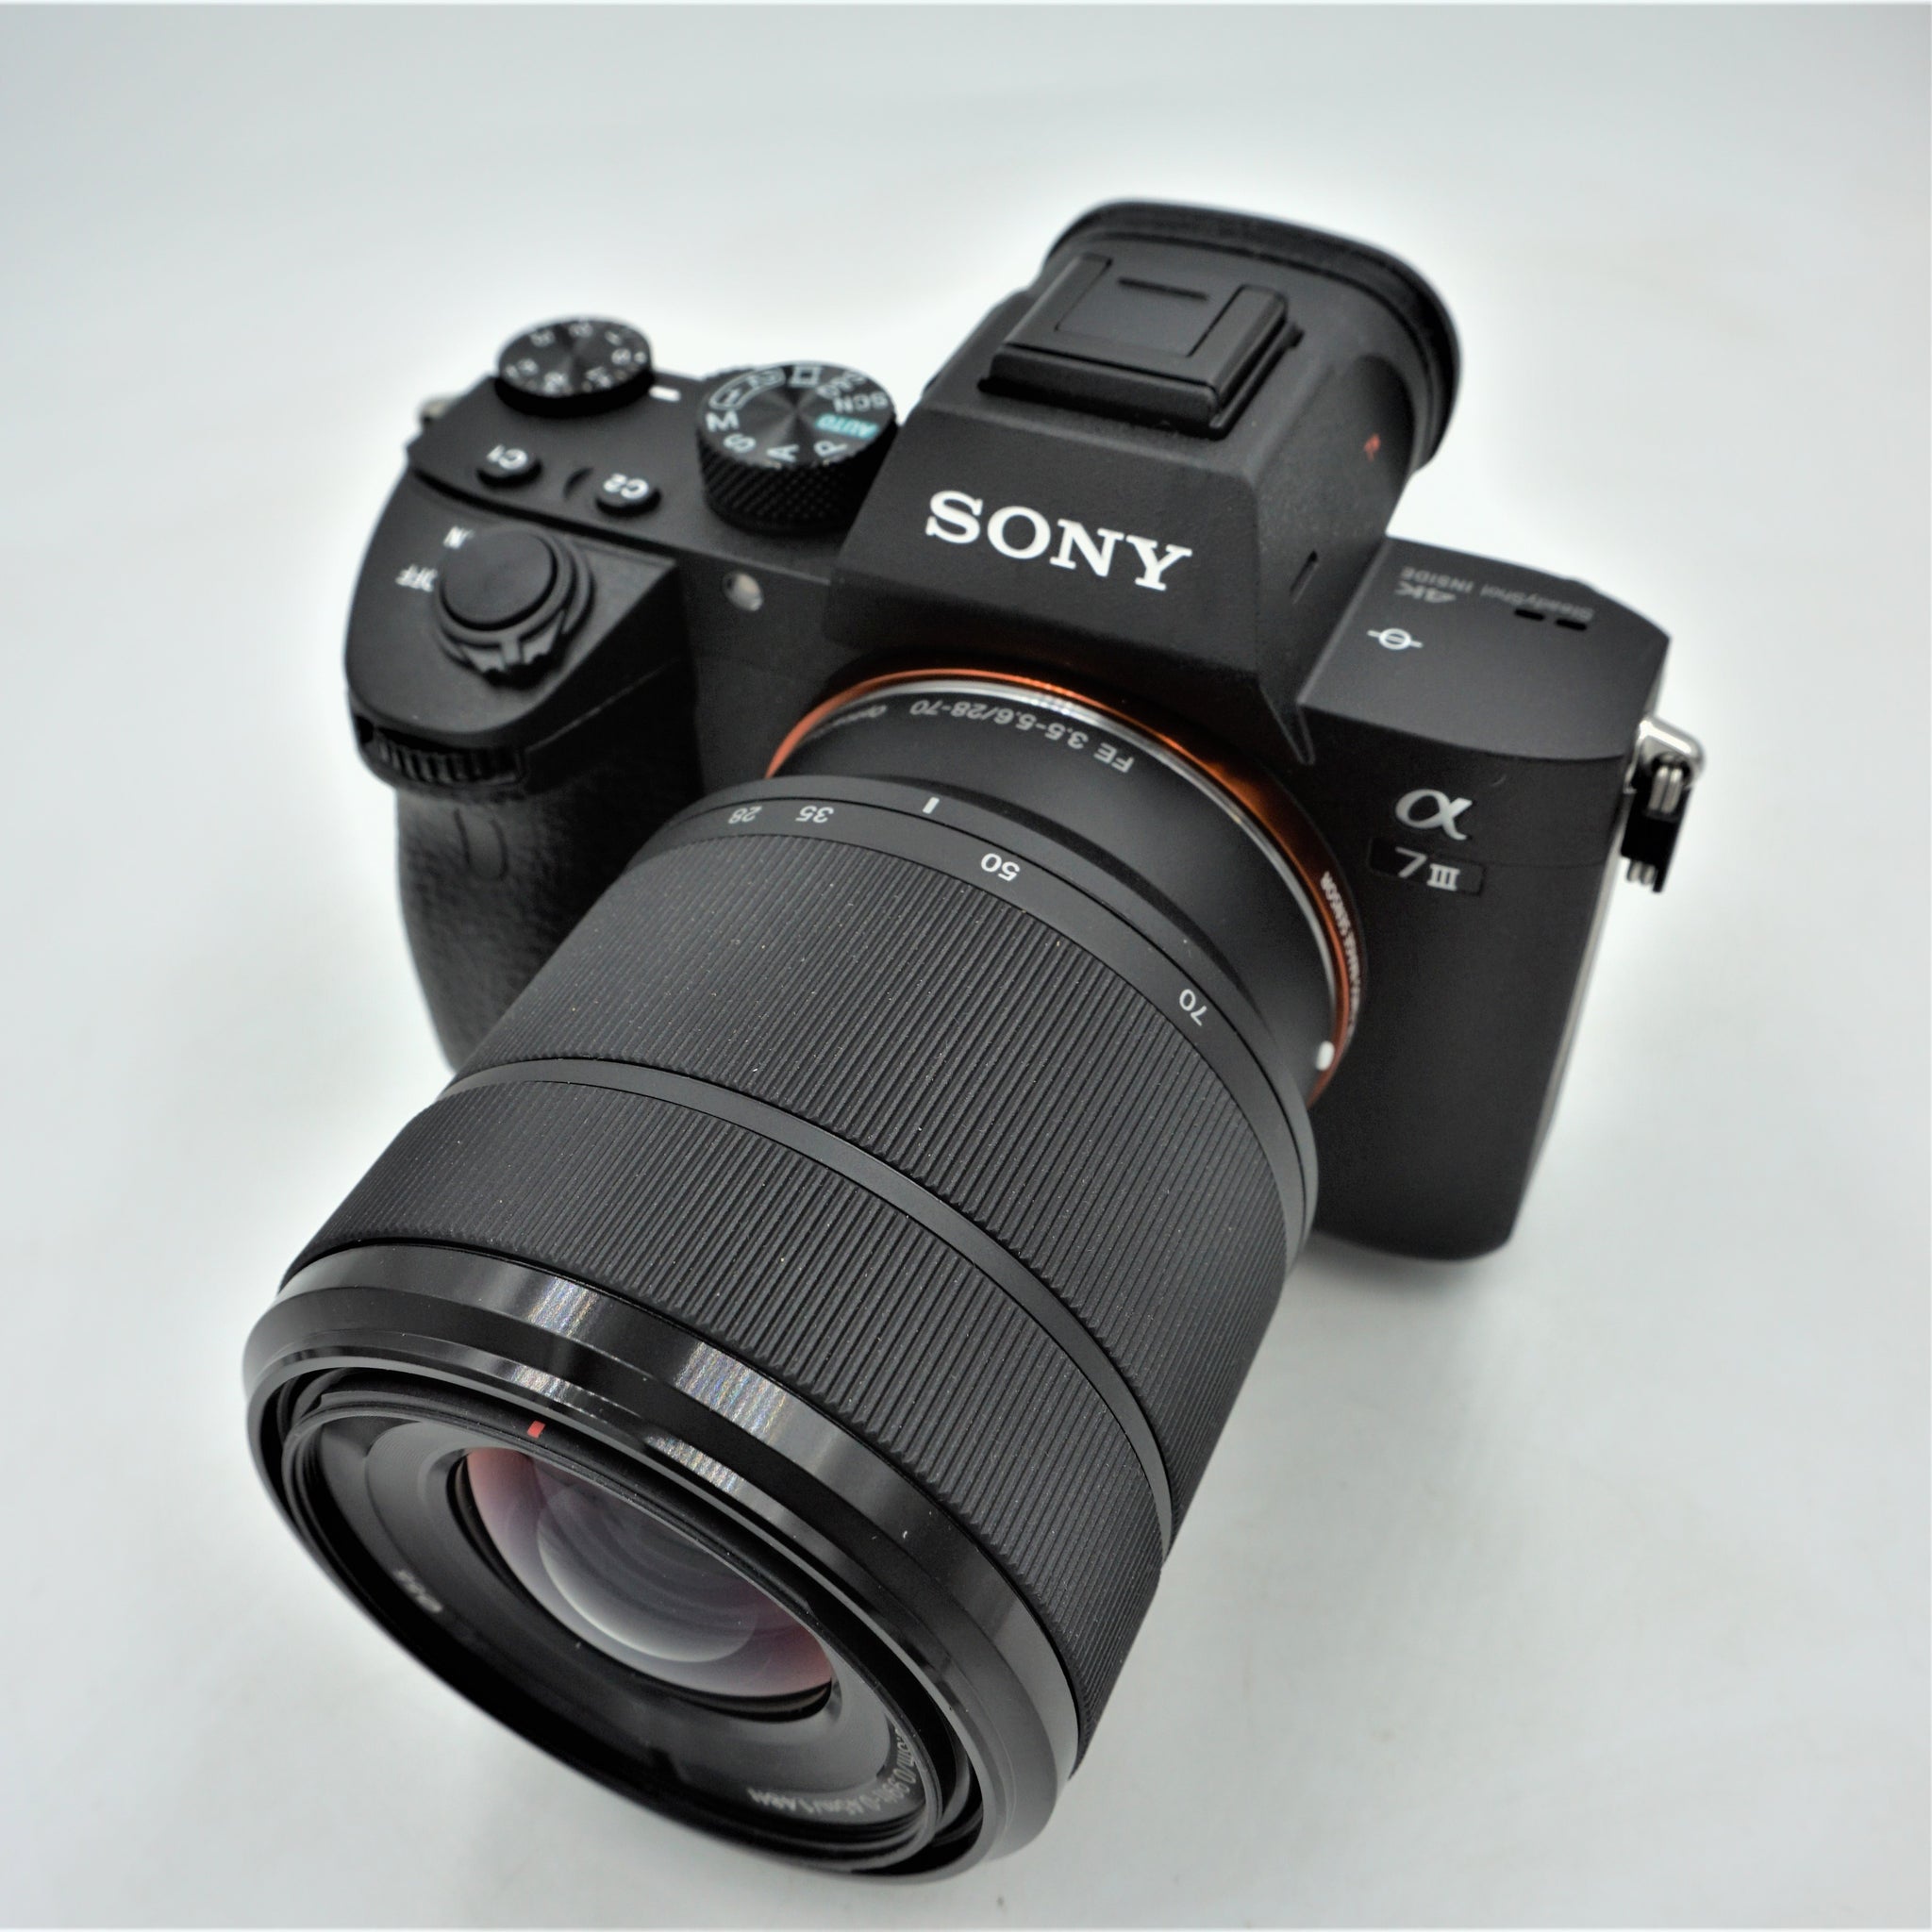 Sony Alpha a7 III Mirrorless Camera with 28-70mm Lens ILCE7M3K/B